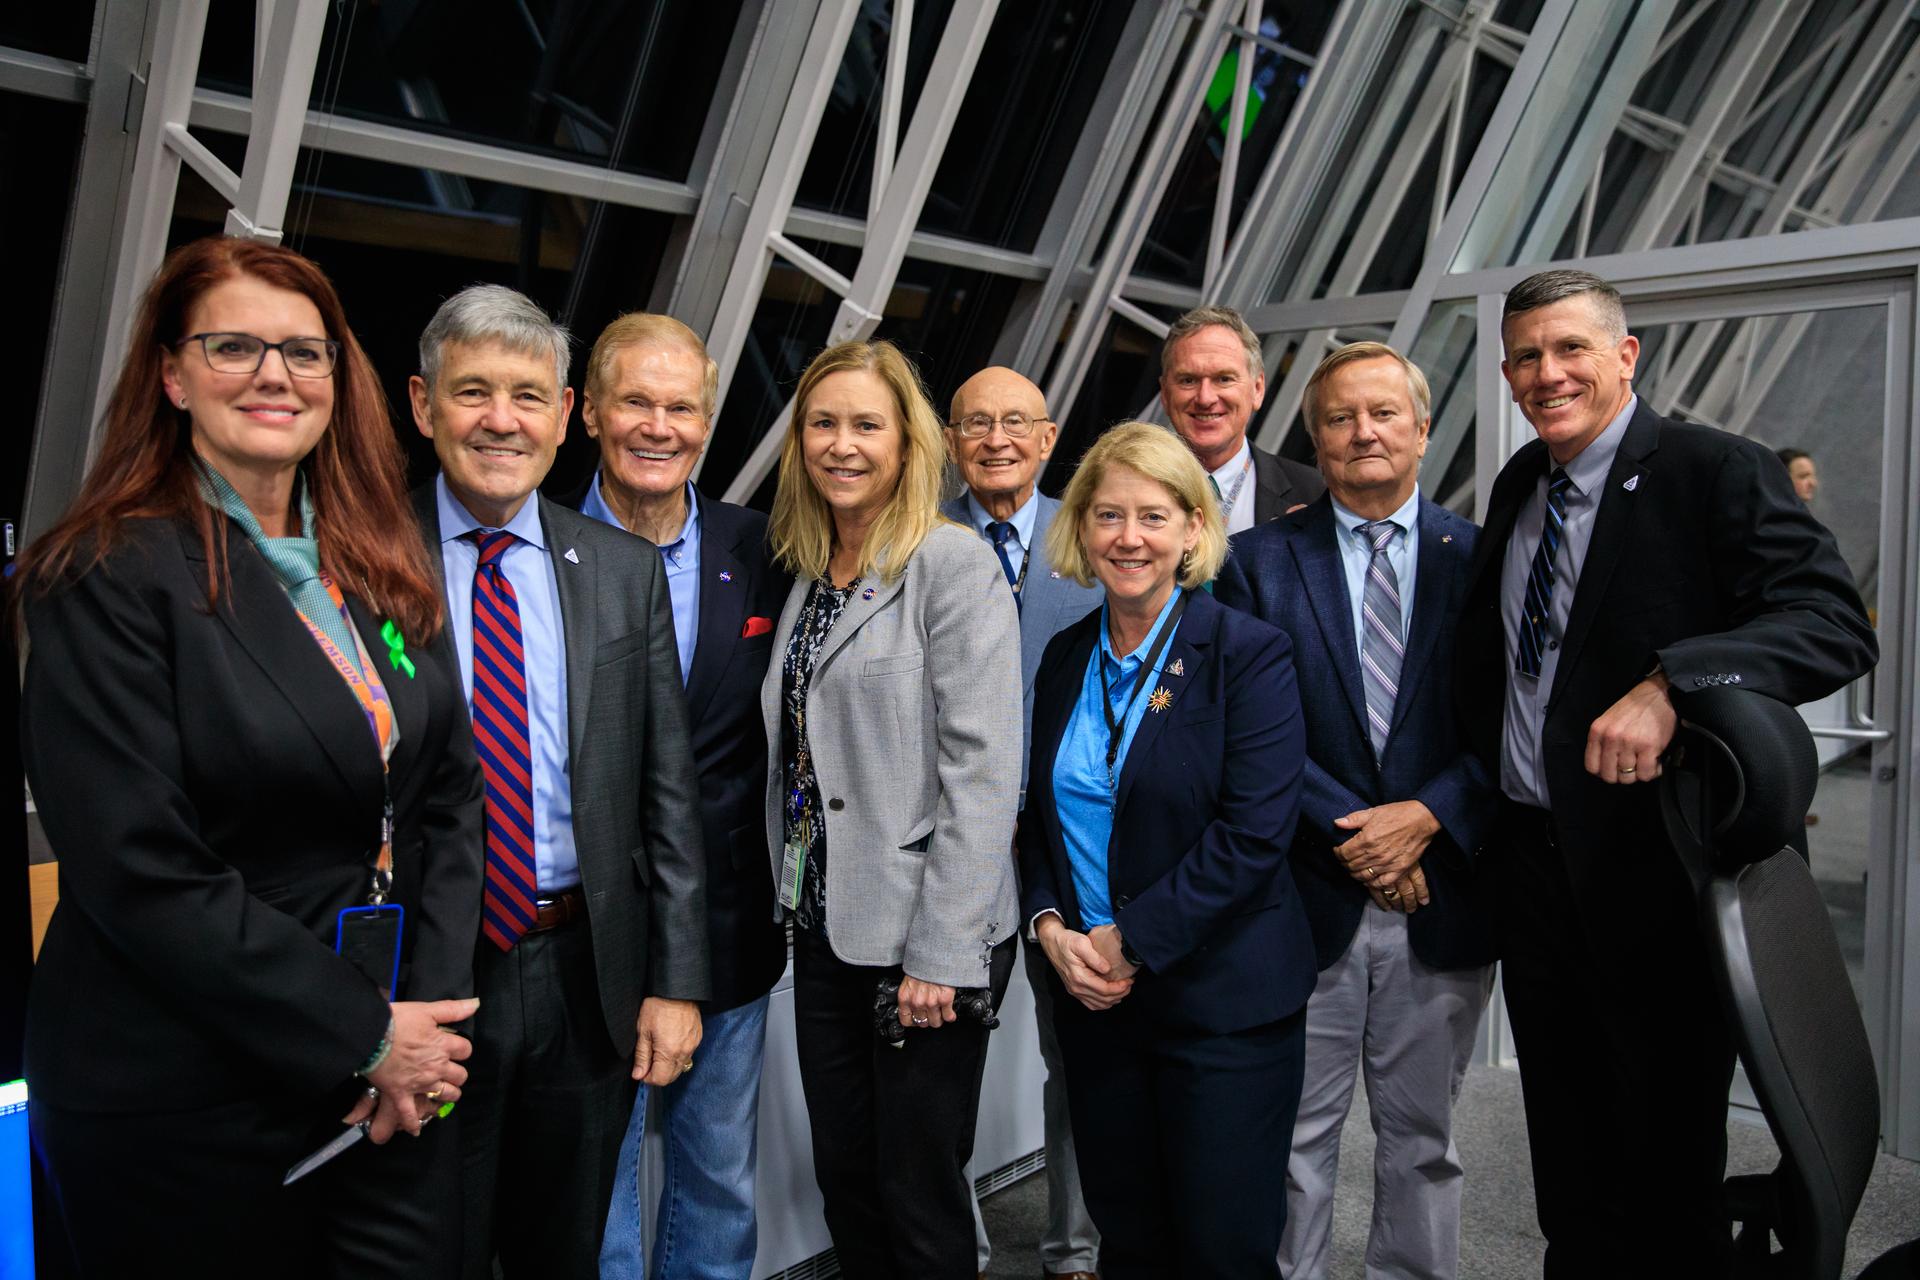 NASA dignitaries and launch team members gather after the successful launch of the agency’s Space Launch System and Orion spacecraft.